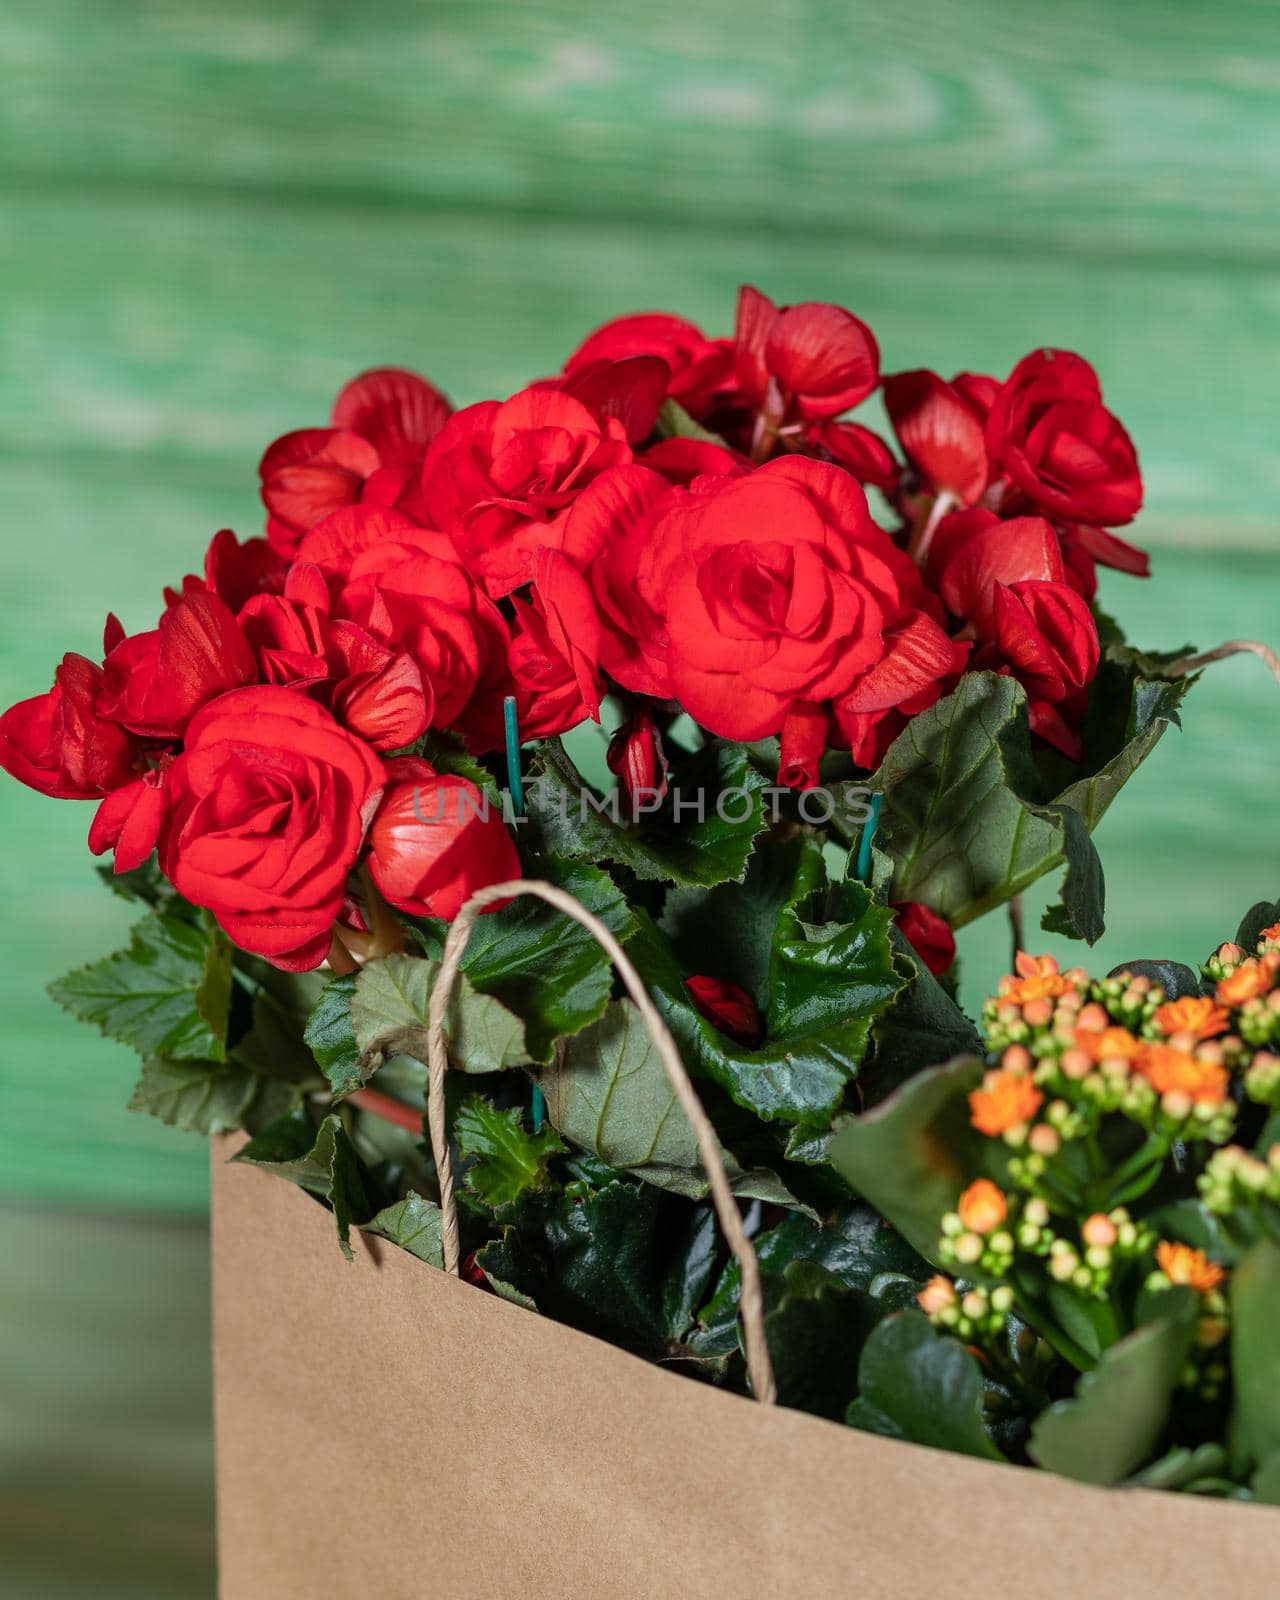 Begonia and kalanchoe in the shopping bag with green background